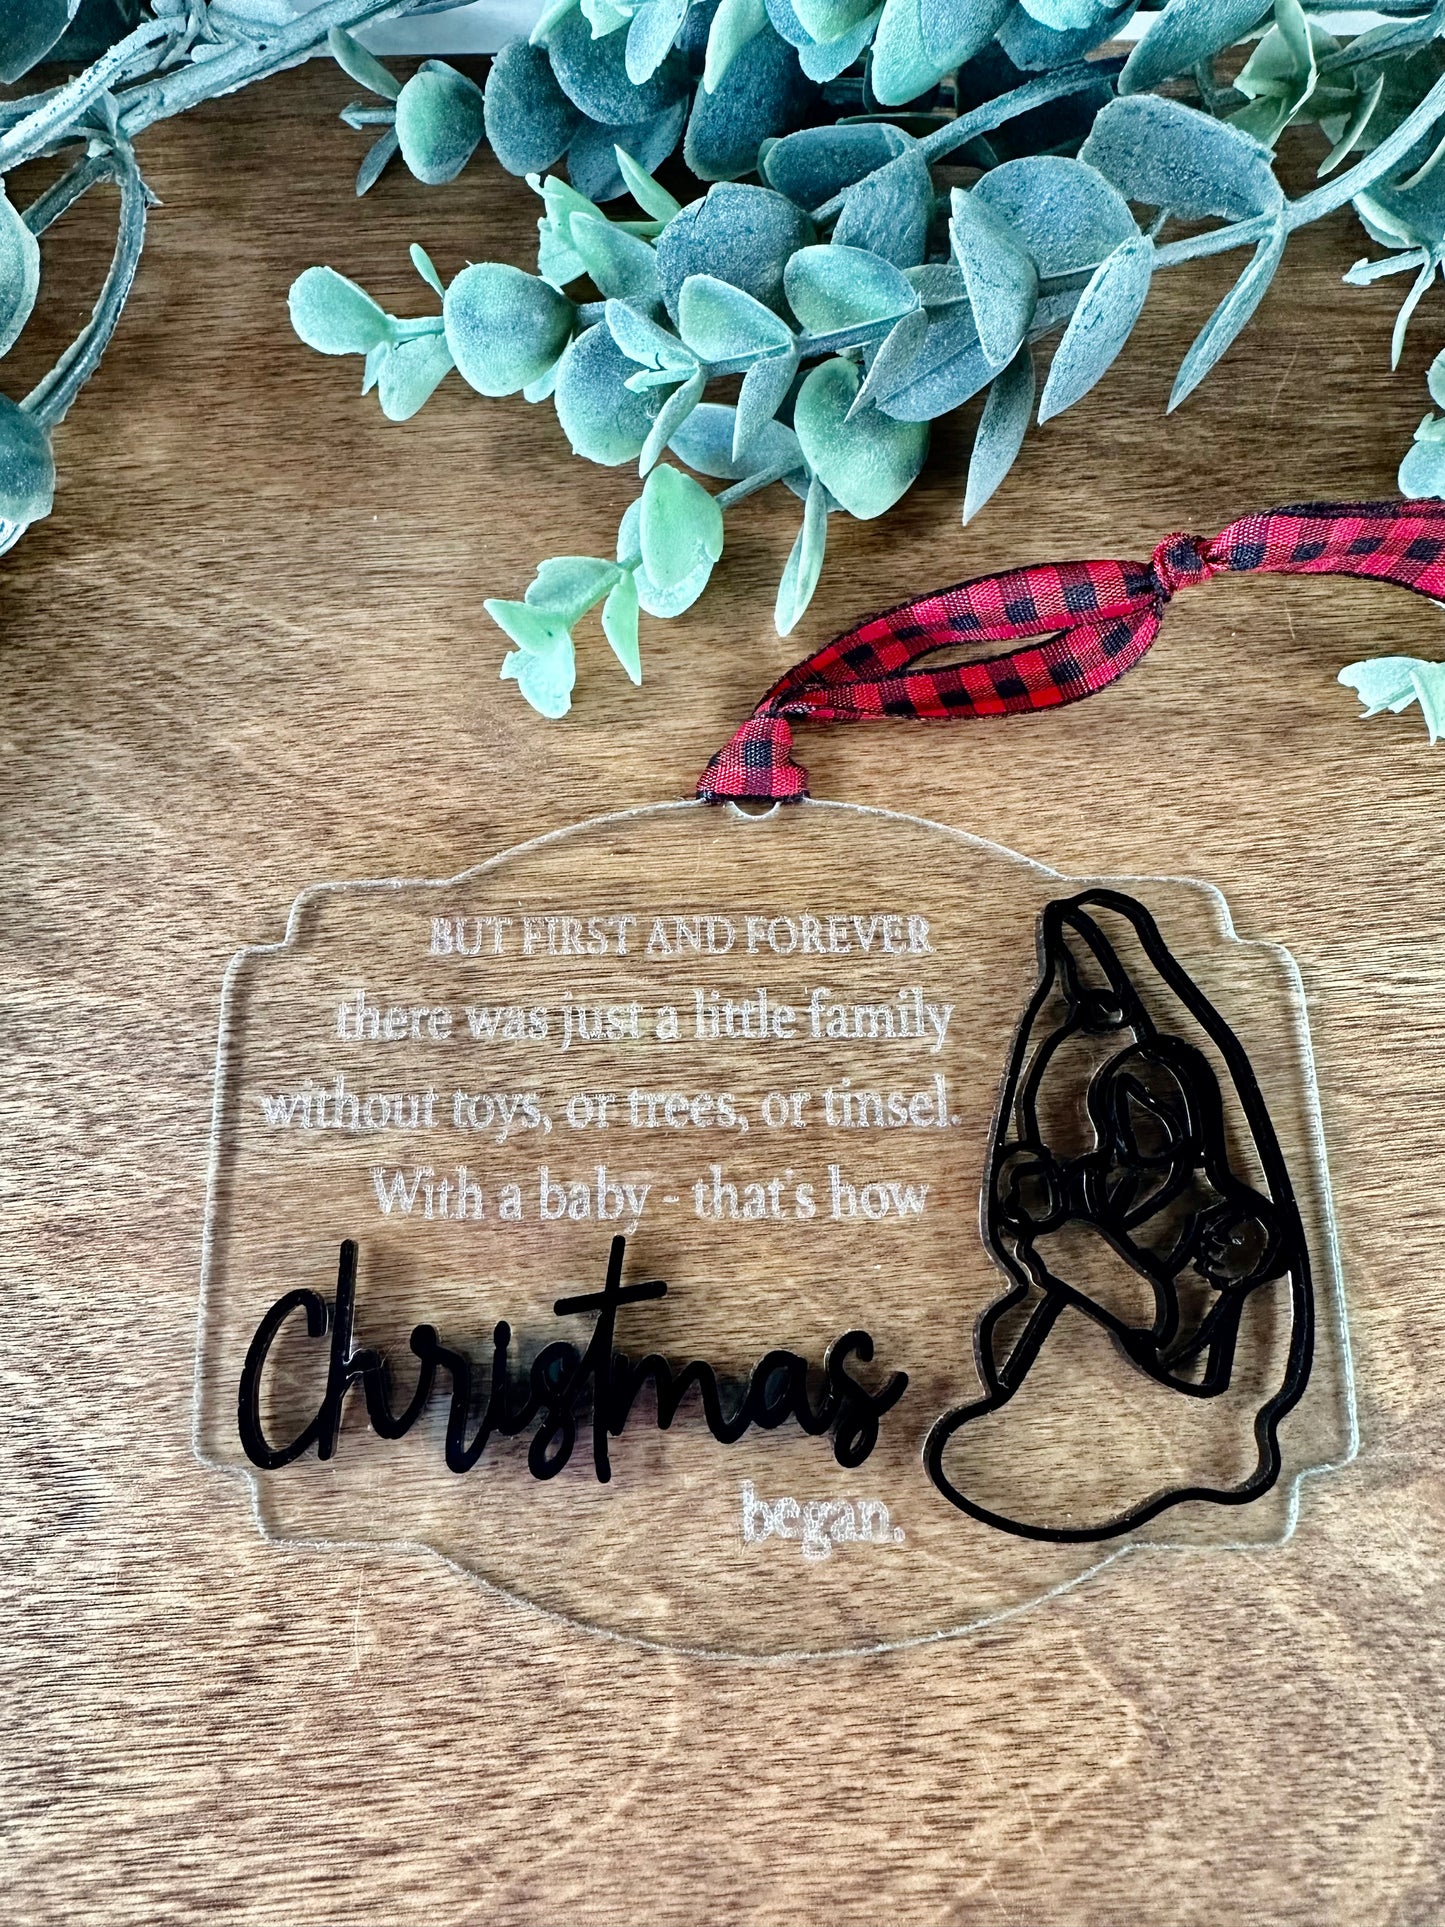 "But First and Forever..."  Ornament